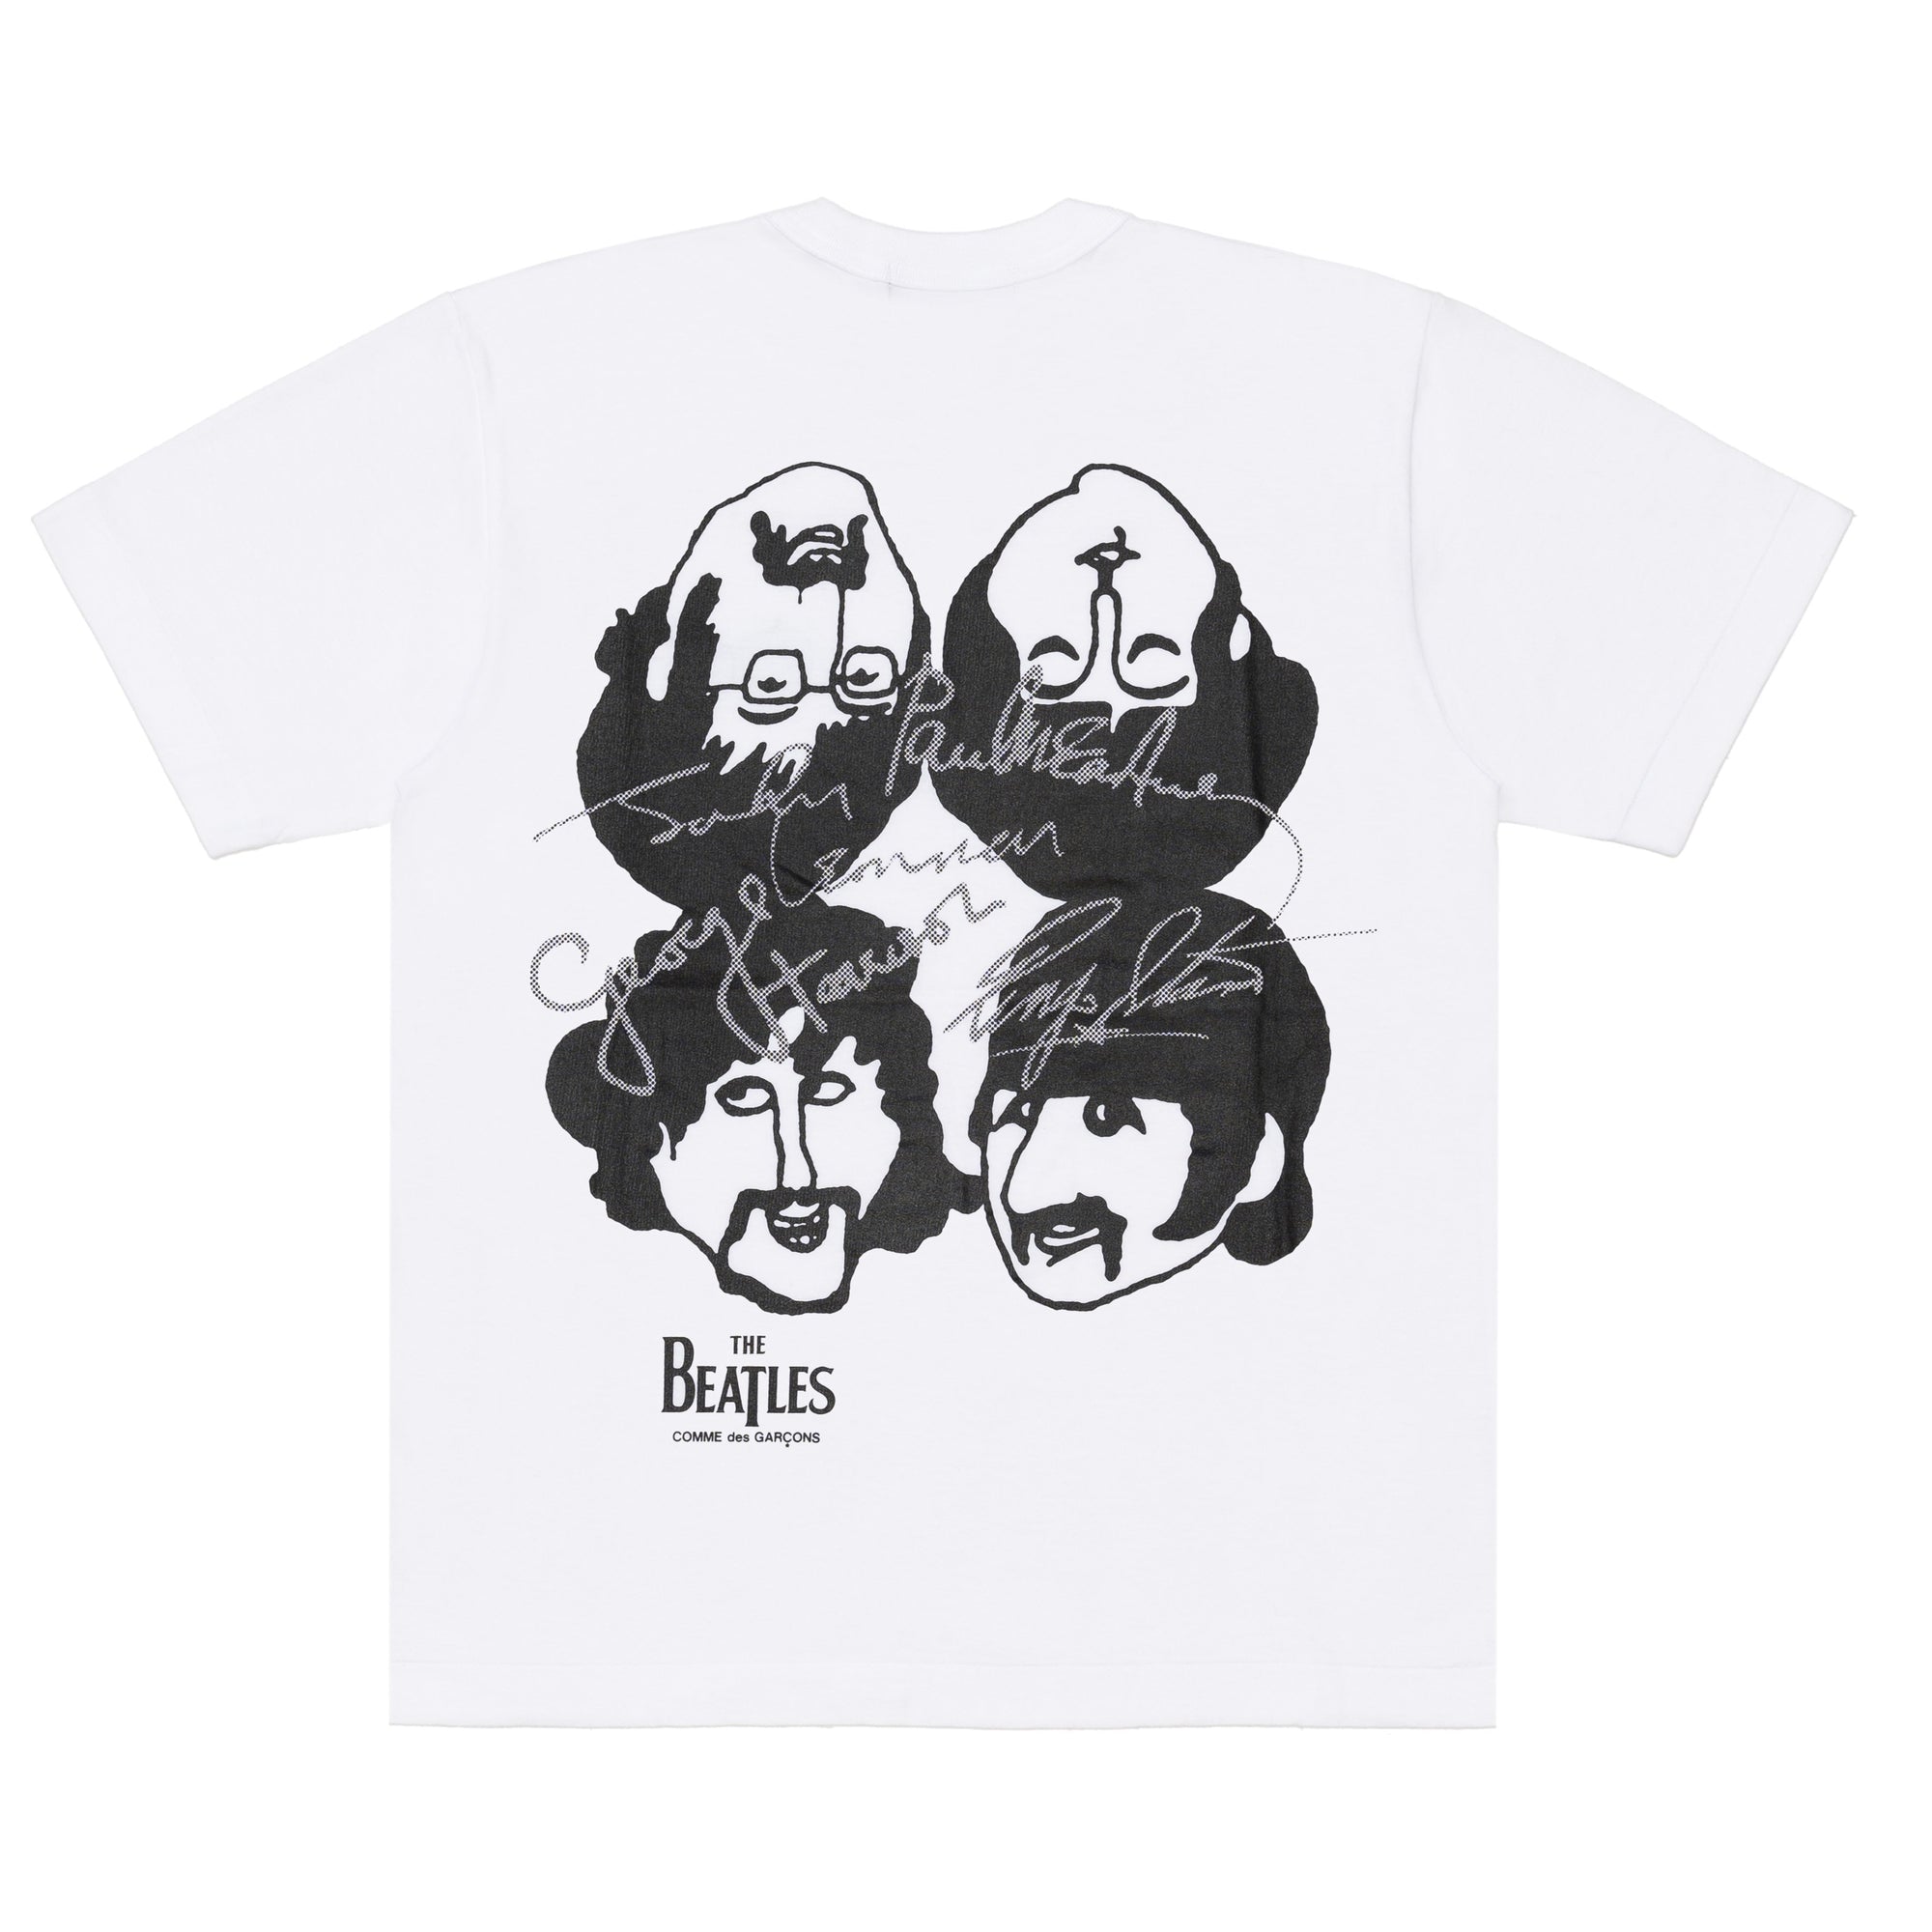 The Beatles CDG - PRINTED T-SHIRT - (WHITE) view 1